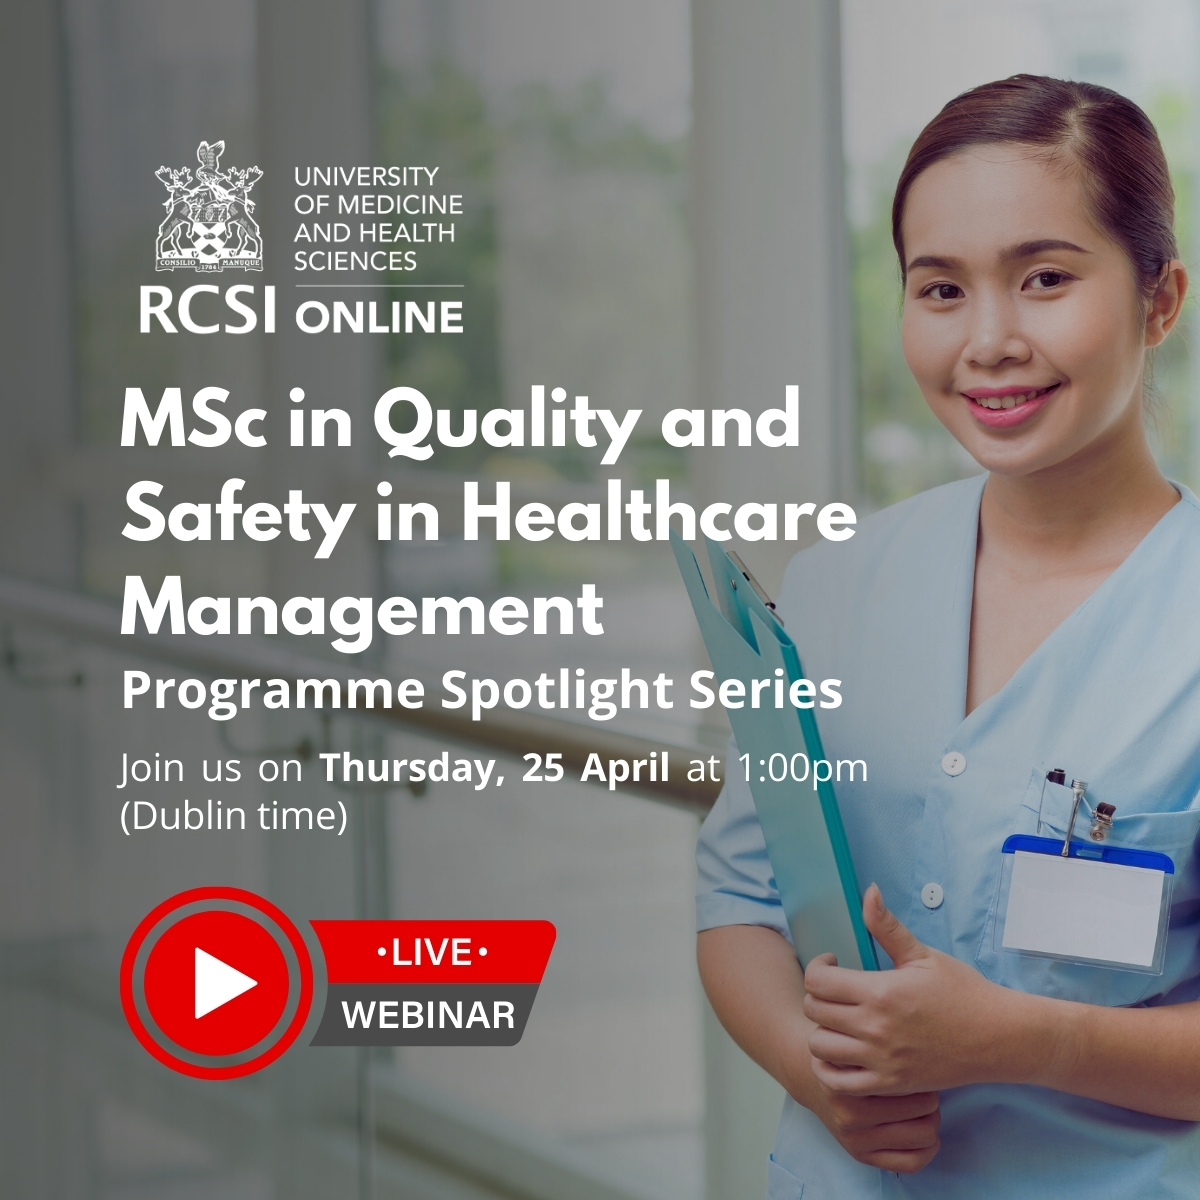 Are you ready to enhance your skills in quality and safety in healthcare management? Register now: 100896engagecms.campusnexus.cloud/rcsio-pd.../ Date: April 25th Time: 13:00 GMT Location: Online Don't miss this opportunity to learn more about #OnlineHealthcareEducation with RCSI.